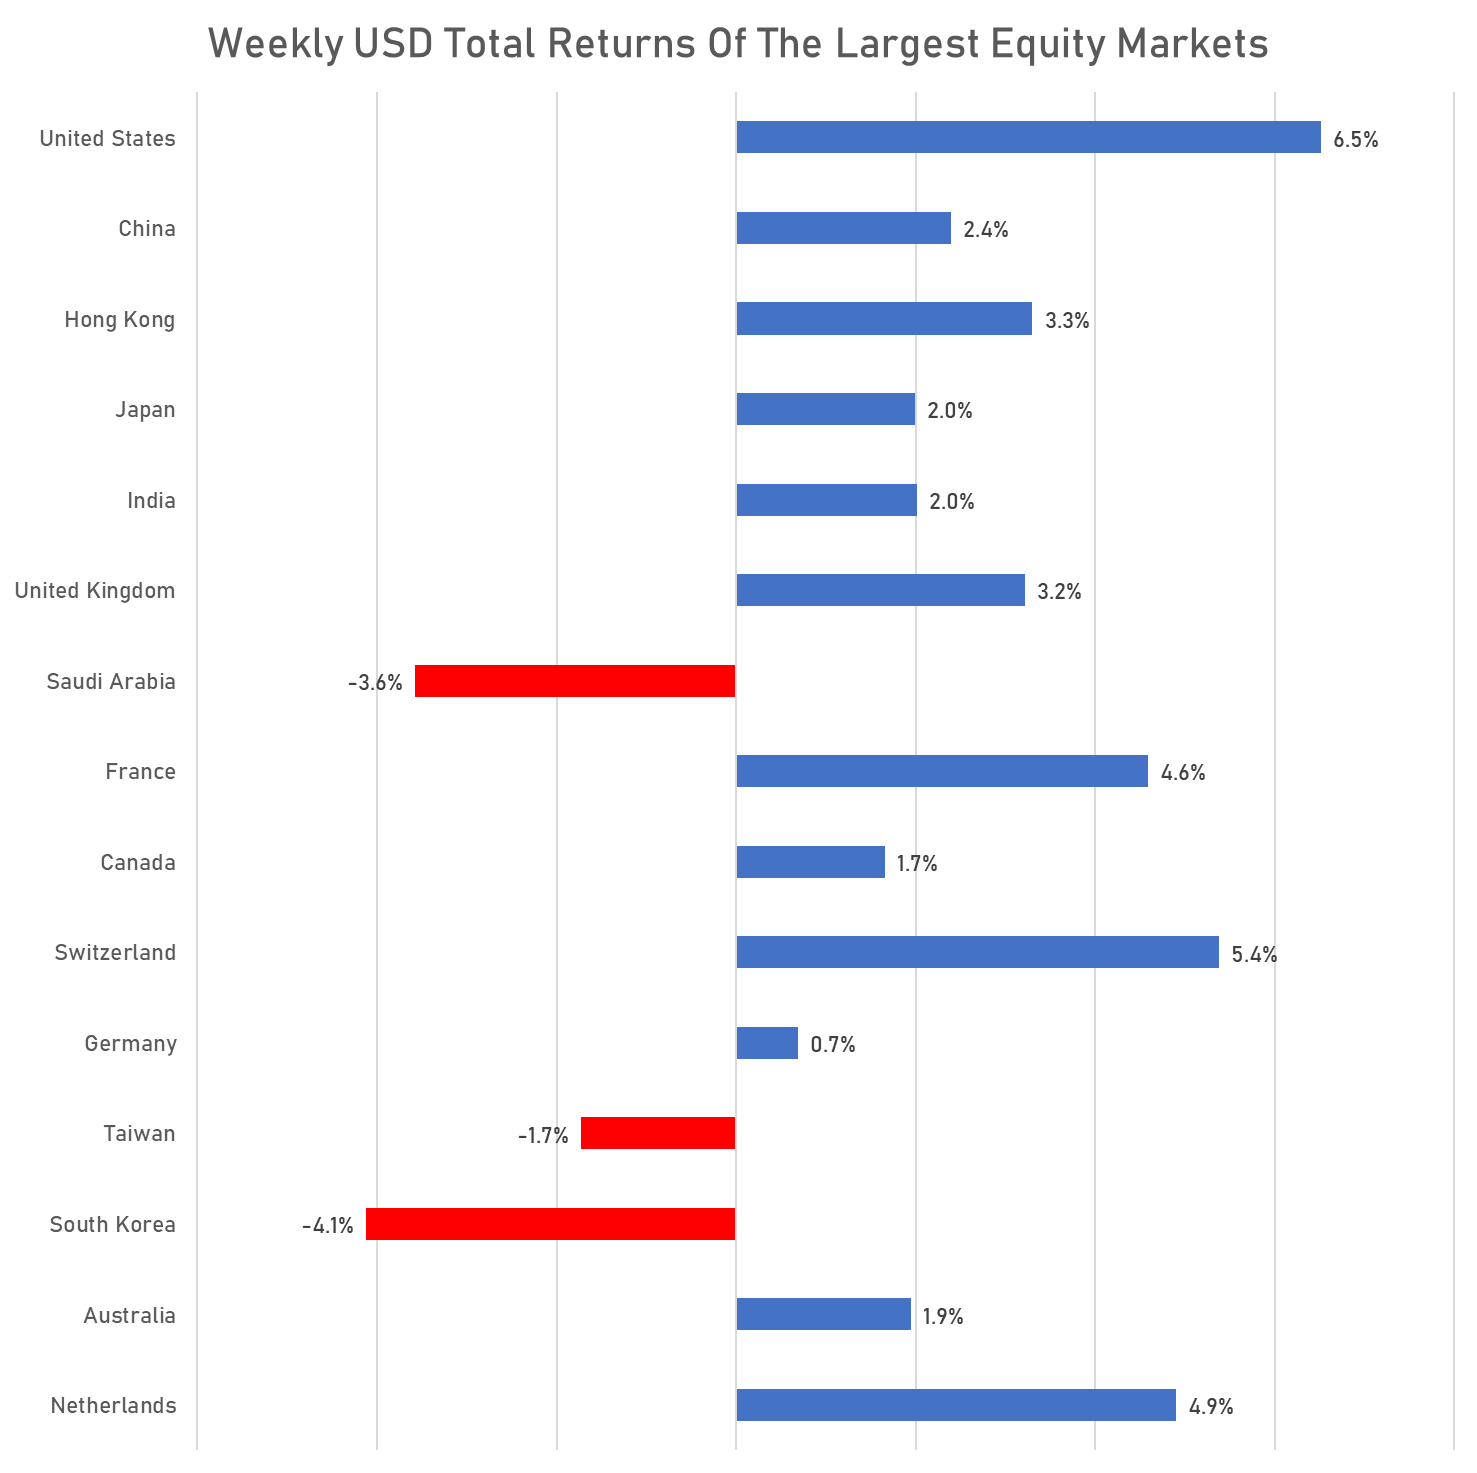 Weekly Performance Of Top Global Equity Markets | Sources: phipost.com, FactSet data